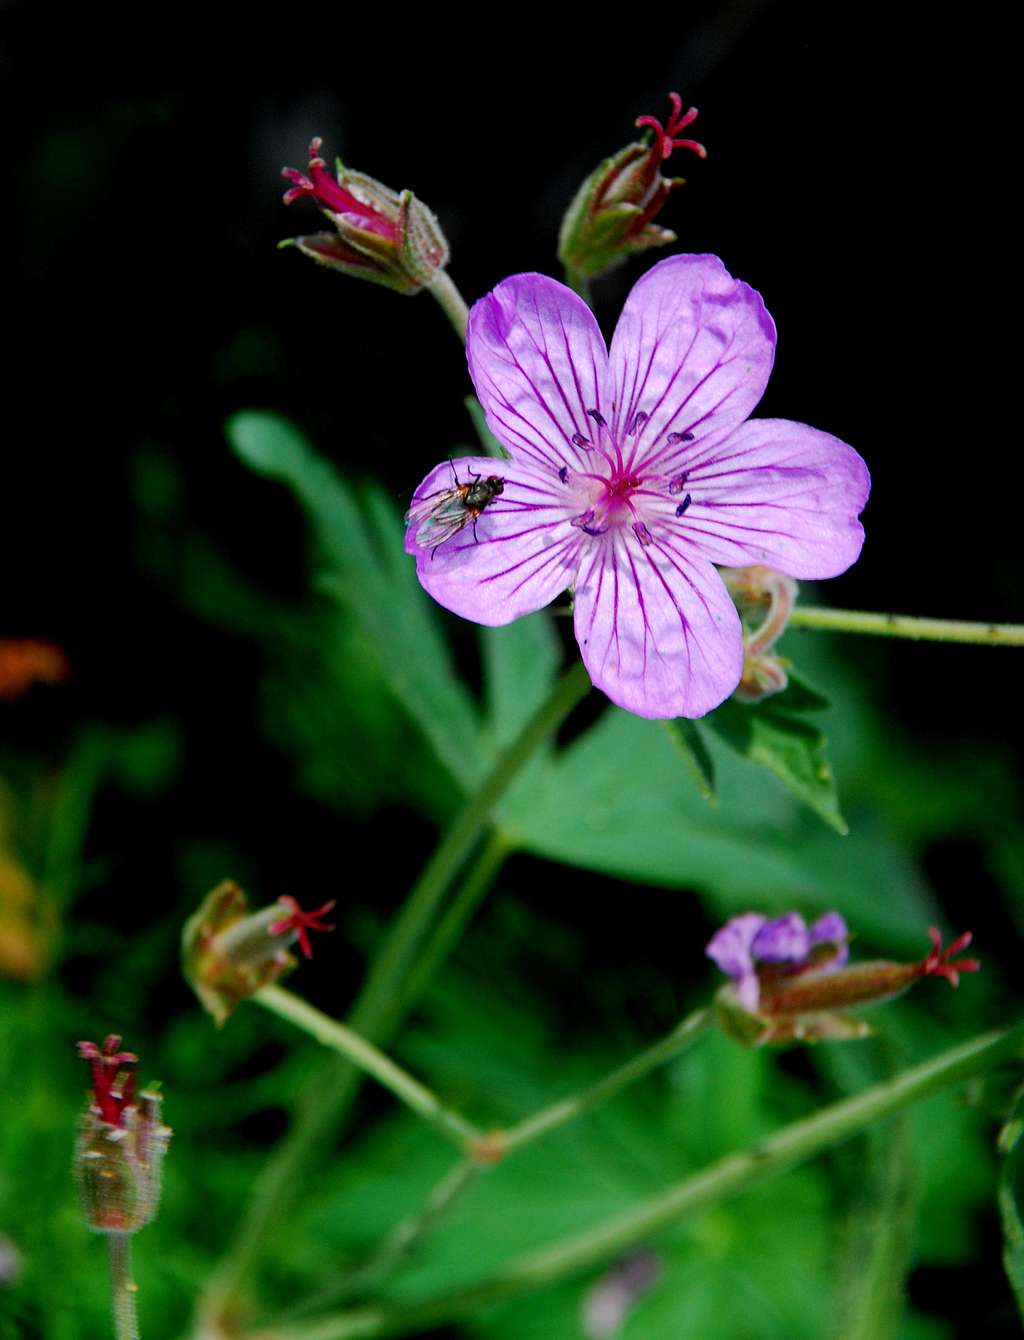 Geranium and Fly